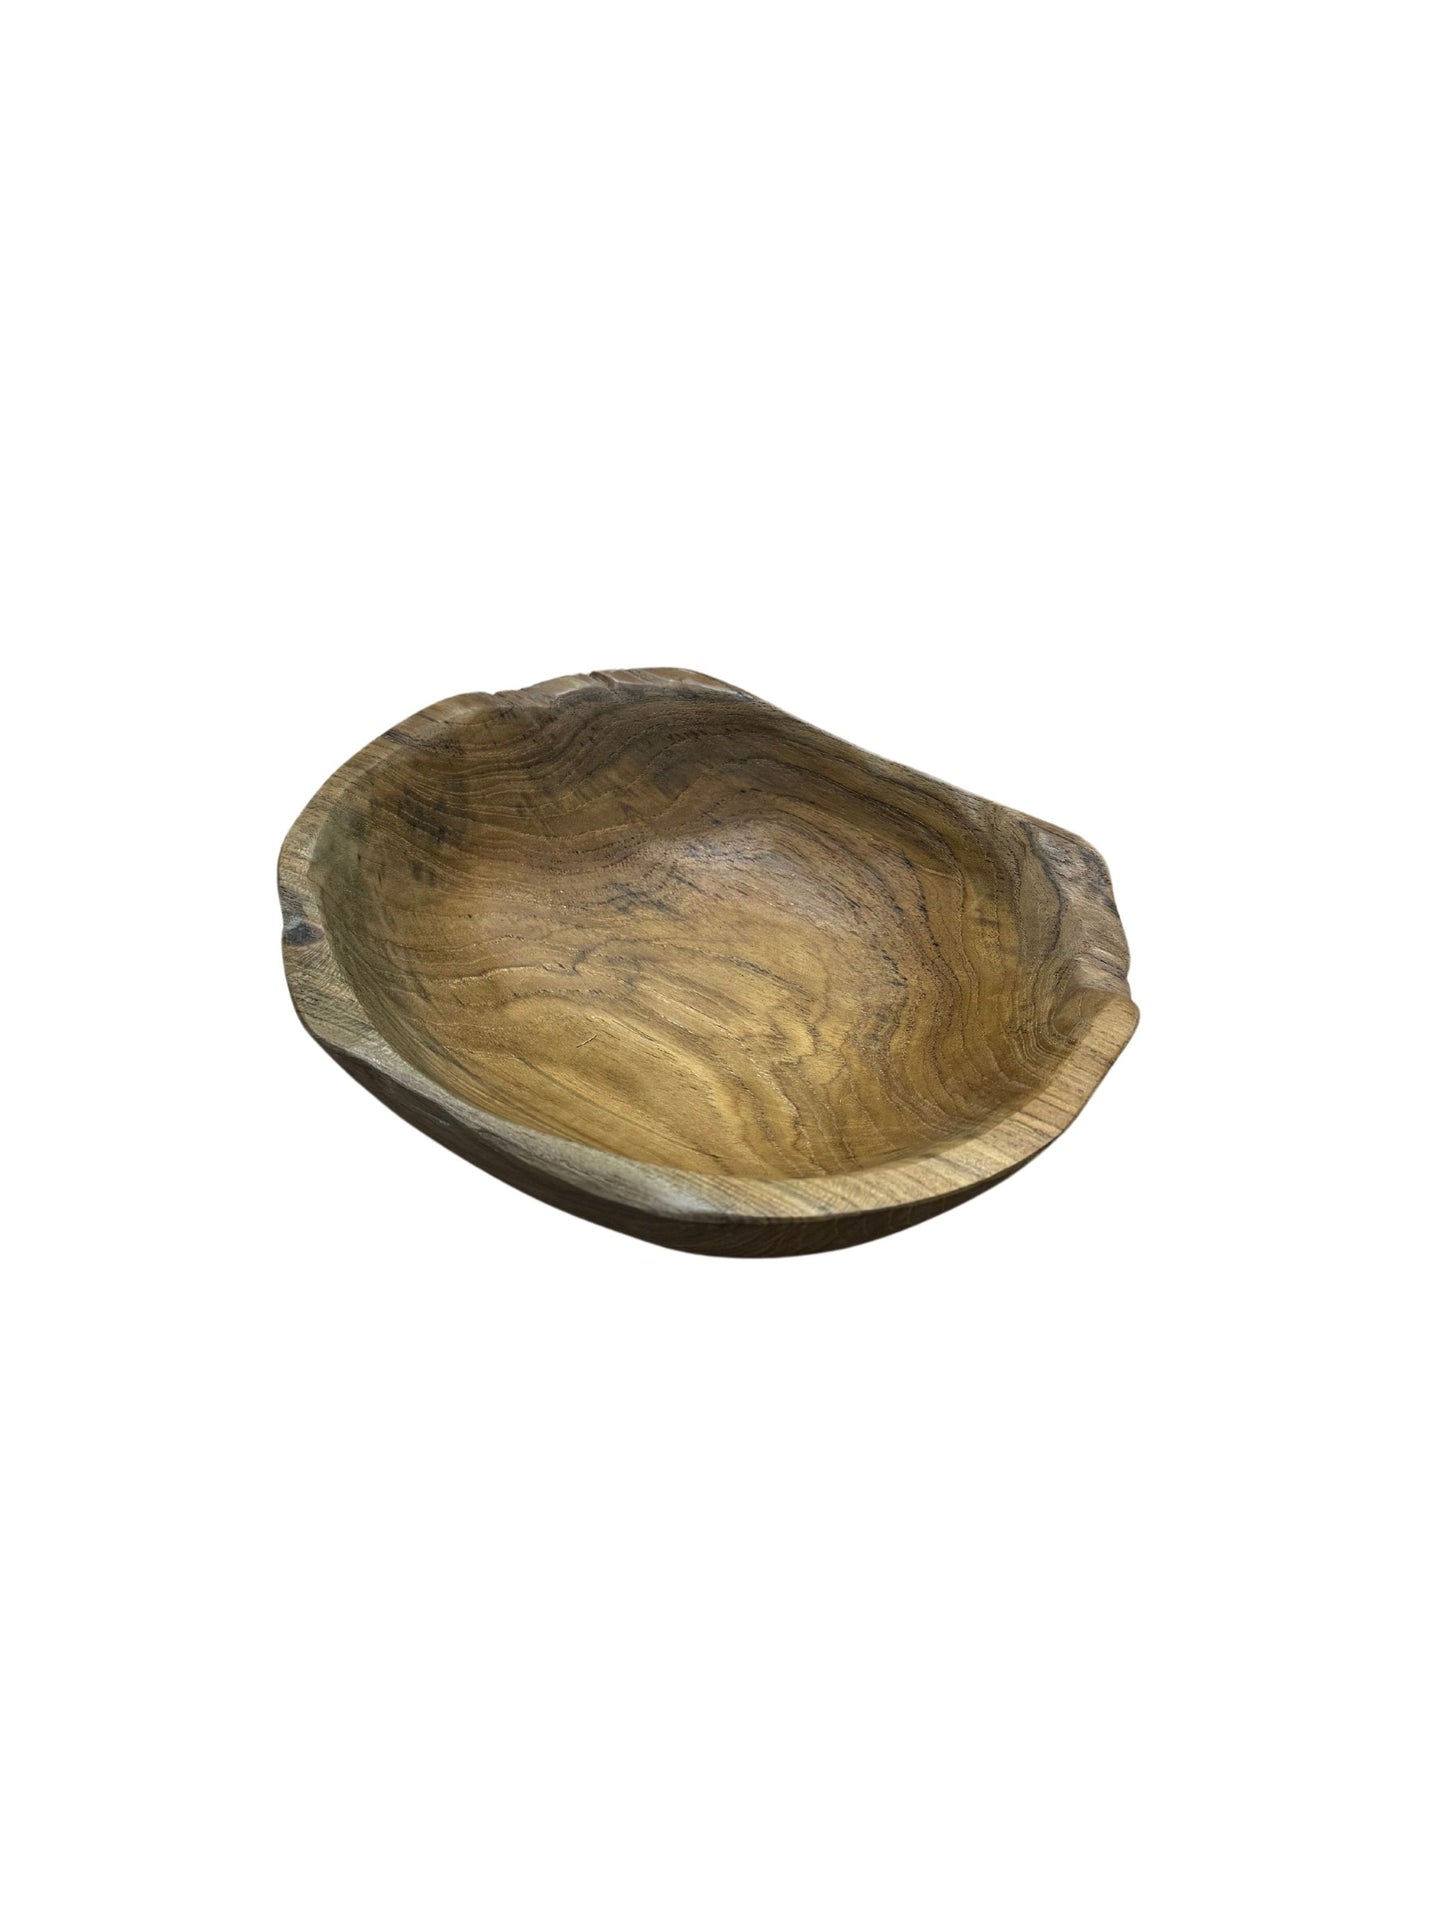 Eclectic Home Accent Teak Small Bowl 130123 Wooden Decor Furniture